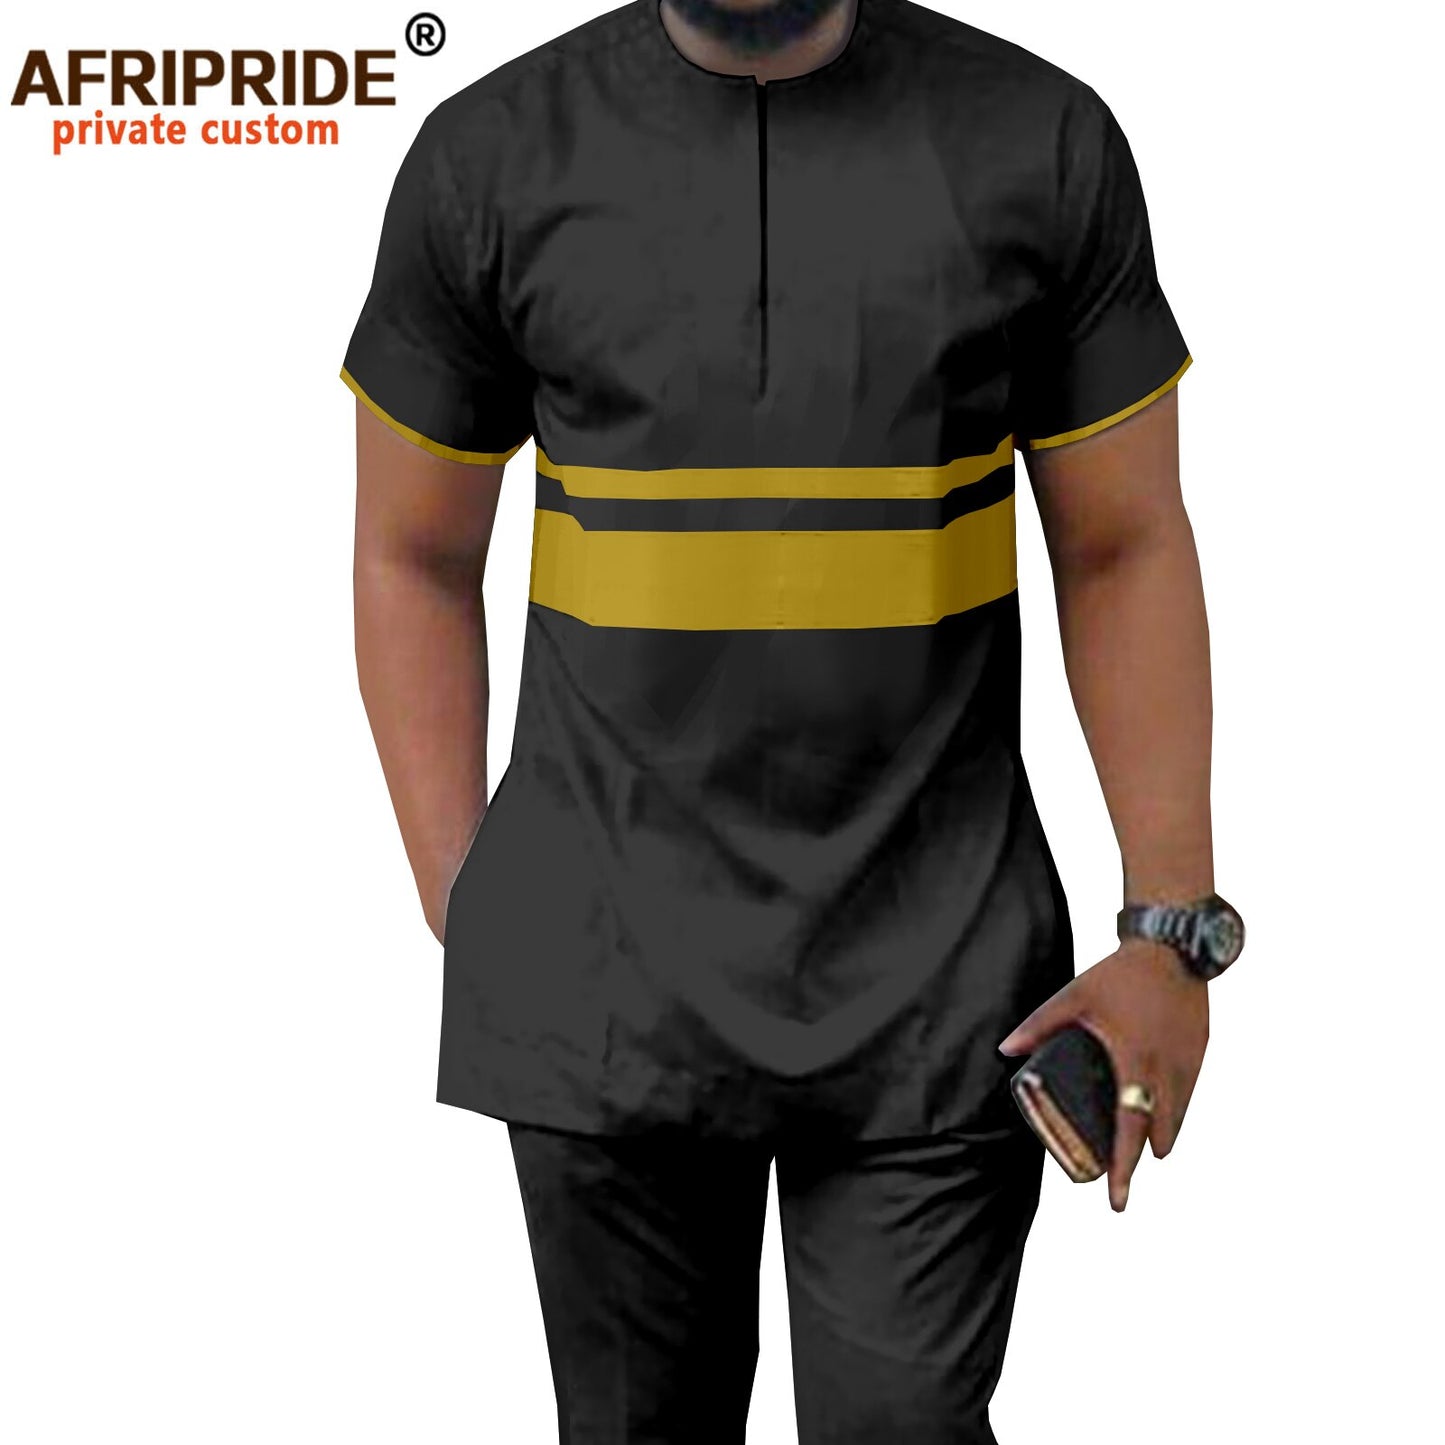 African Men`s Clothing Short Sleeve Dashiki Shirts and Pants 2 Piece Set Plus Size Casual Outfits Ankara Style Blouse A2116042